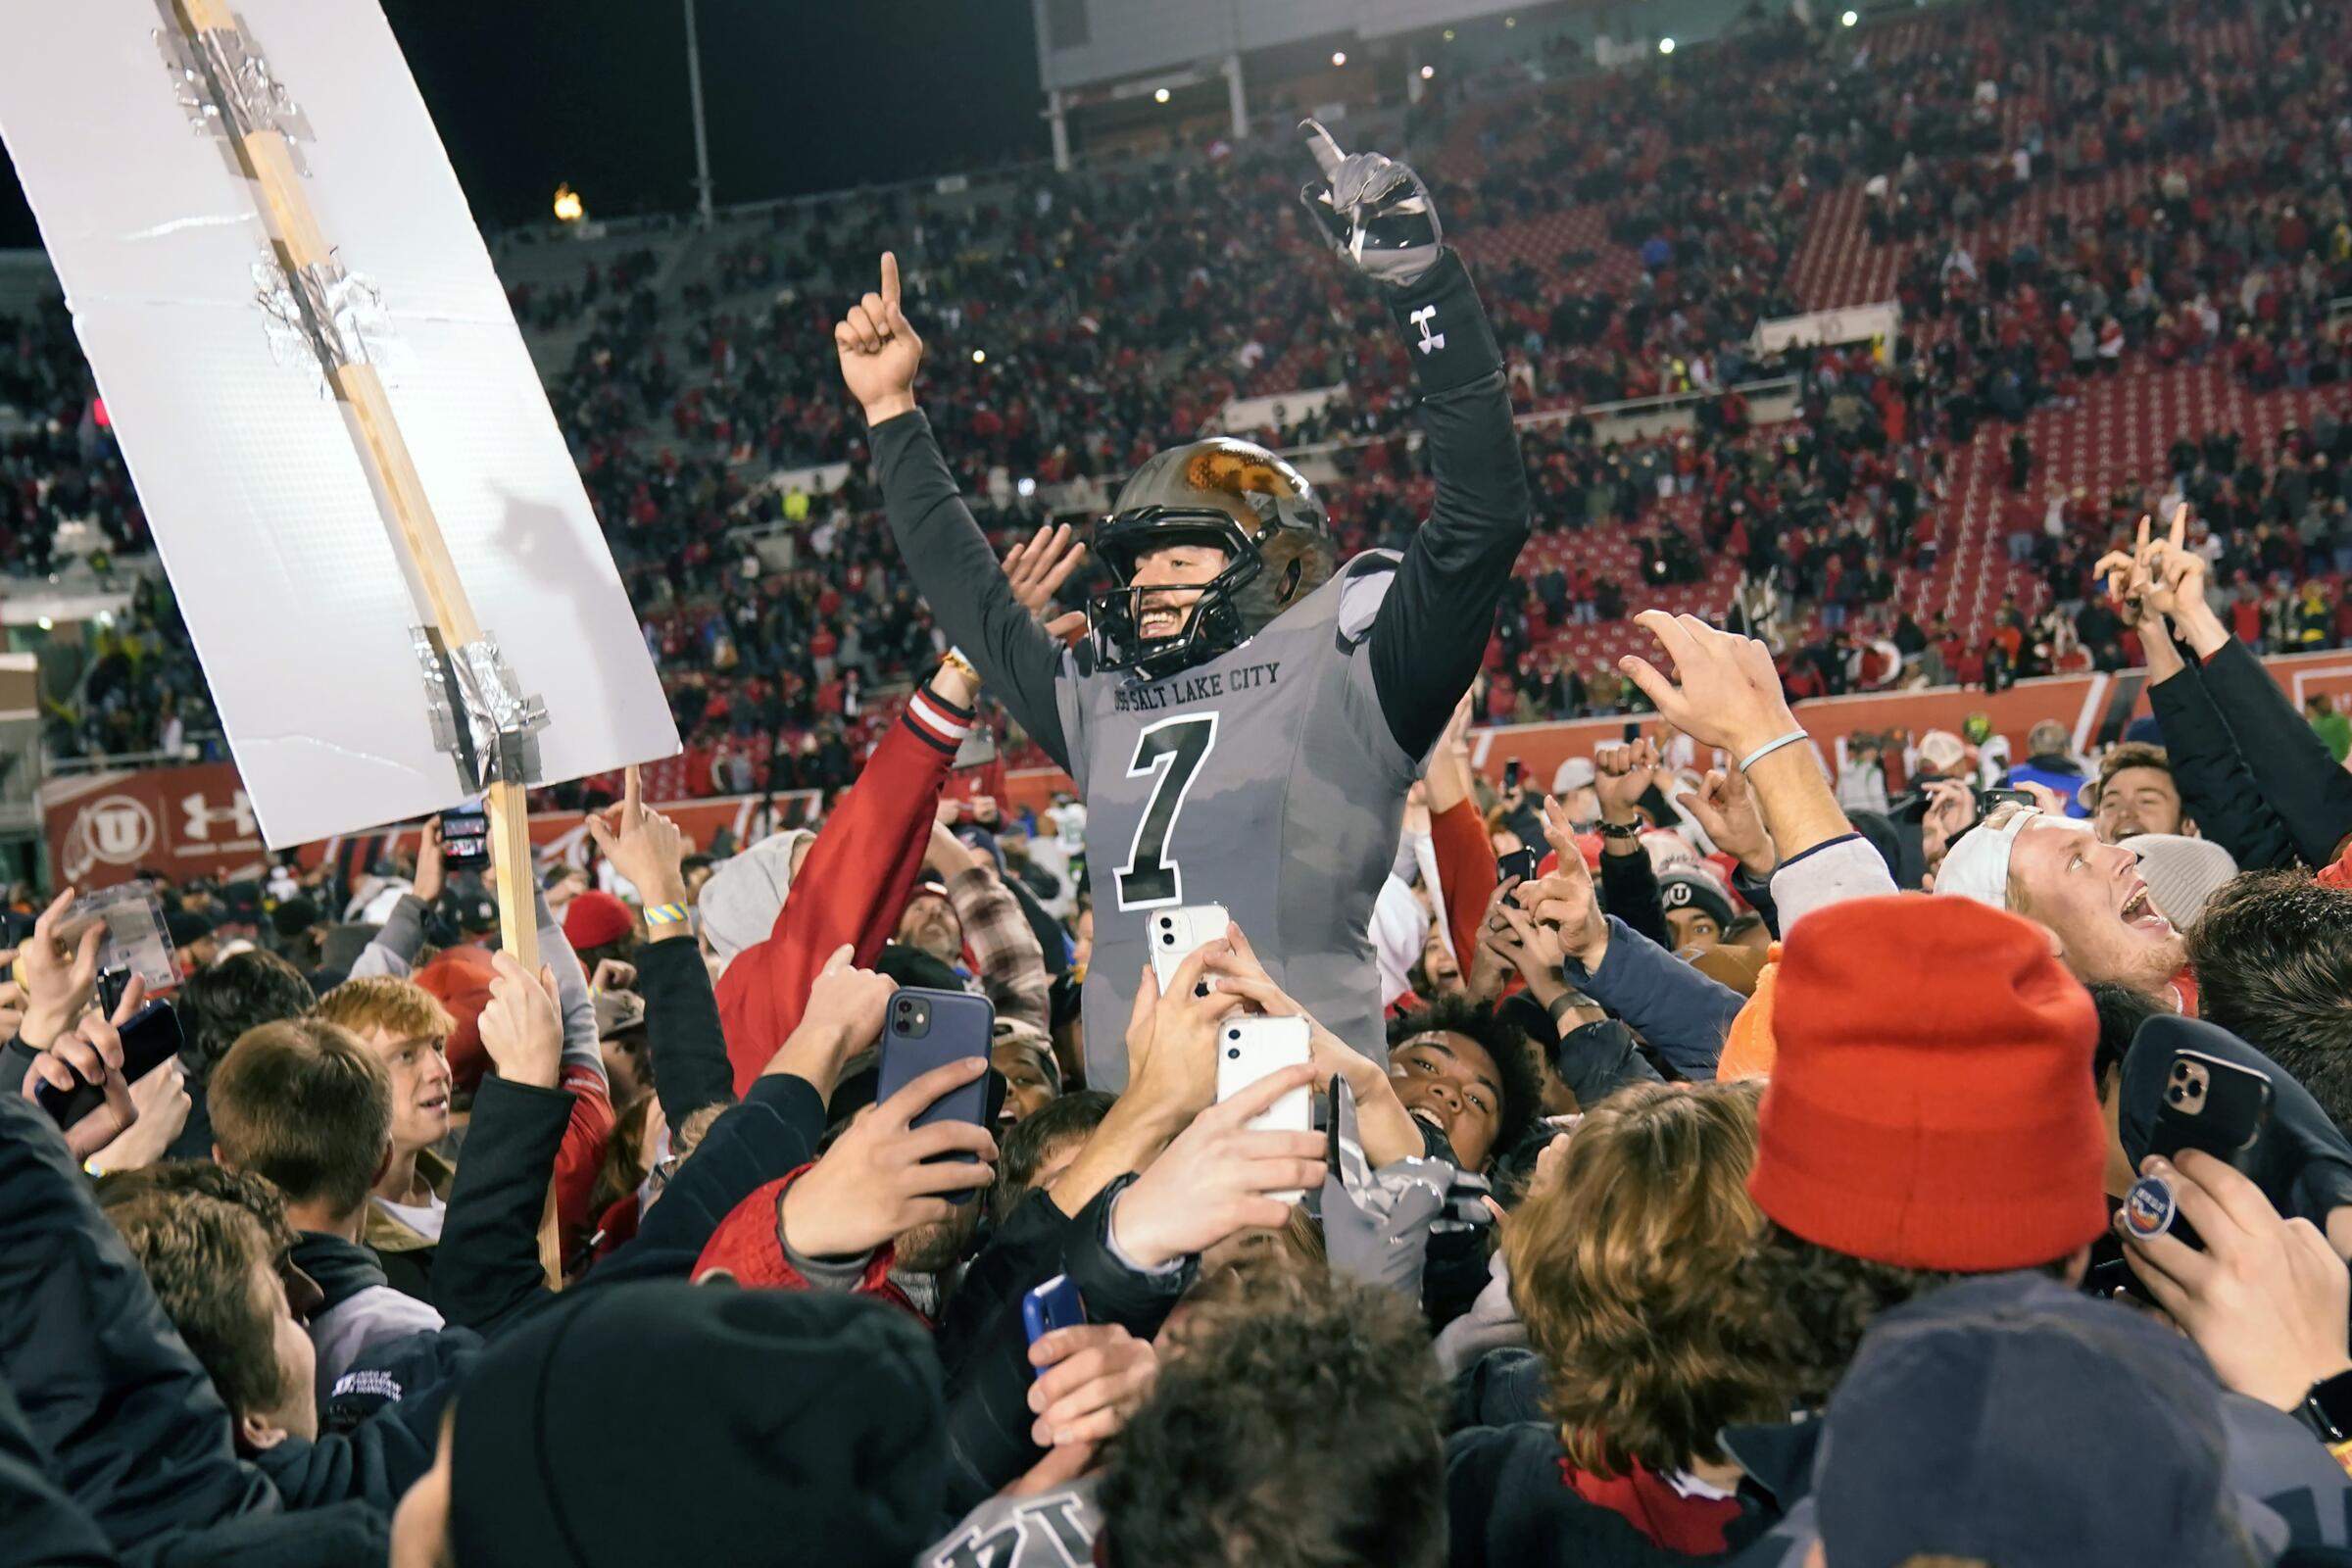 Utah quarterback Cameron Rising celebrates with students who rushed the field following the Utes' upset victory.